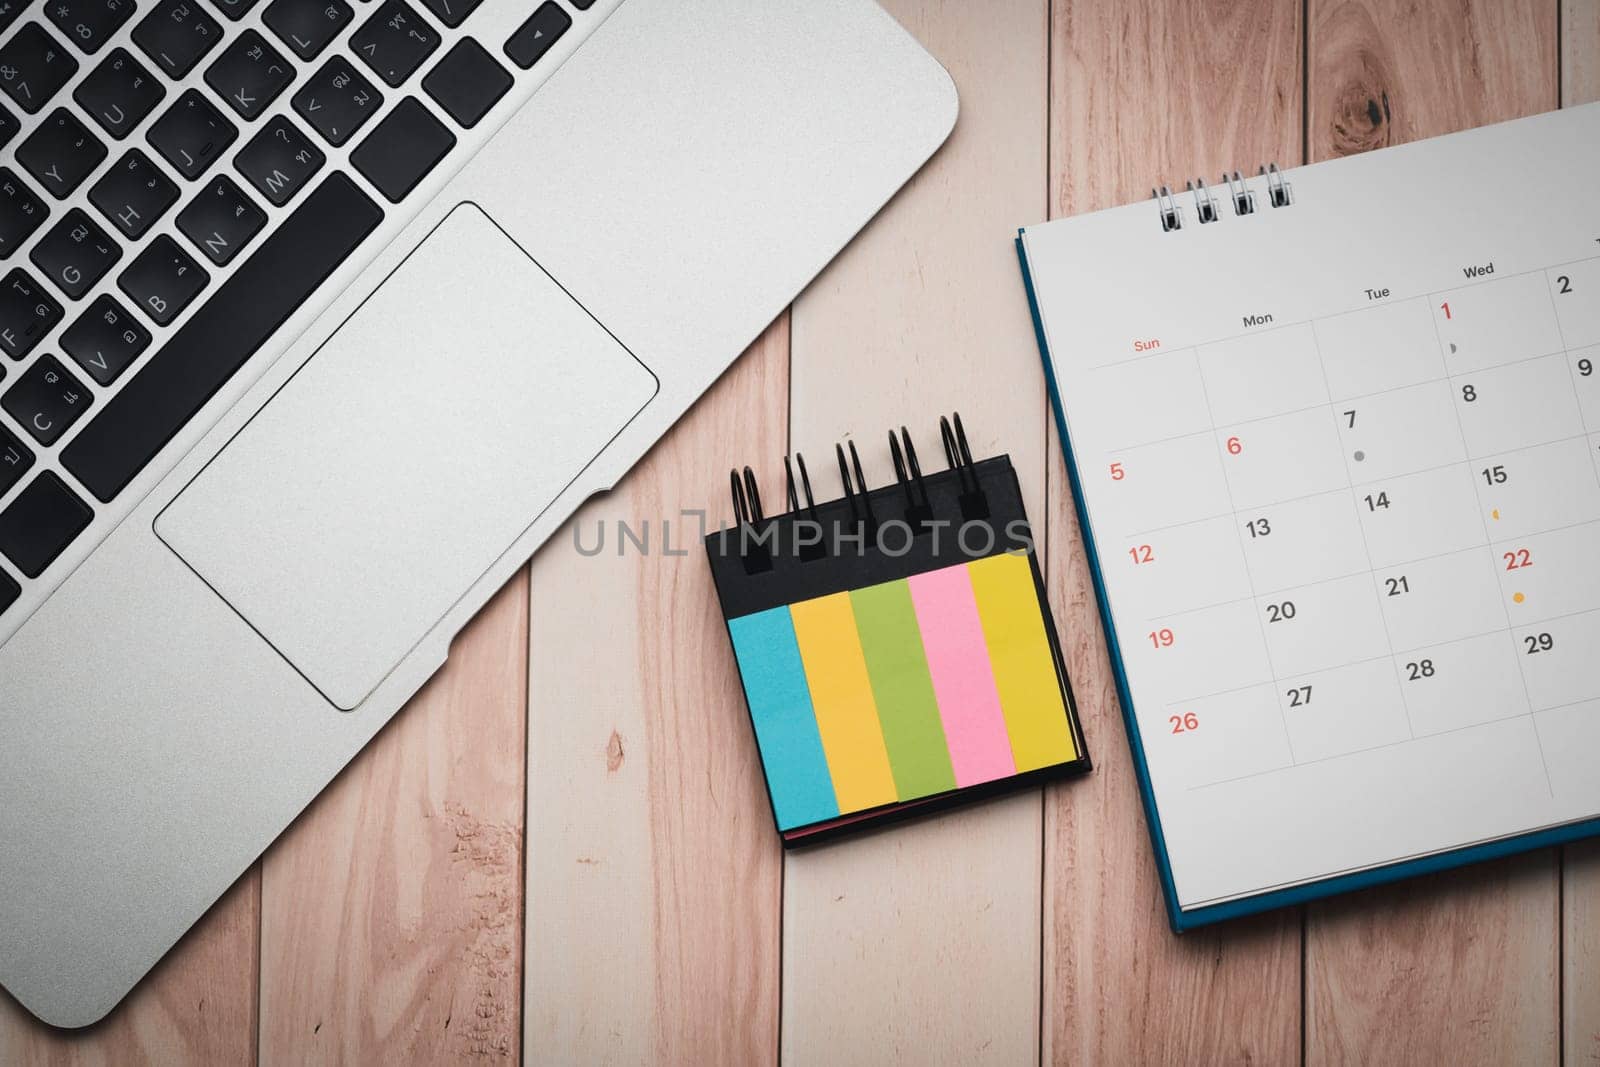 A laptop, index flag, and calendar are neatly placed on the wooden desk for efficient workspace organization